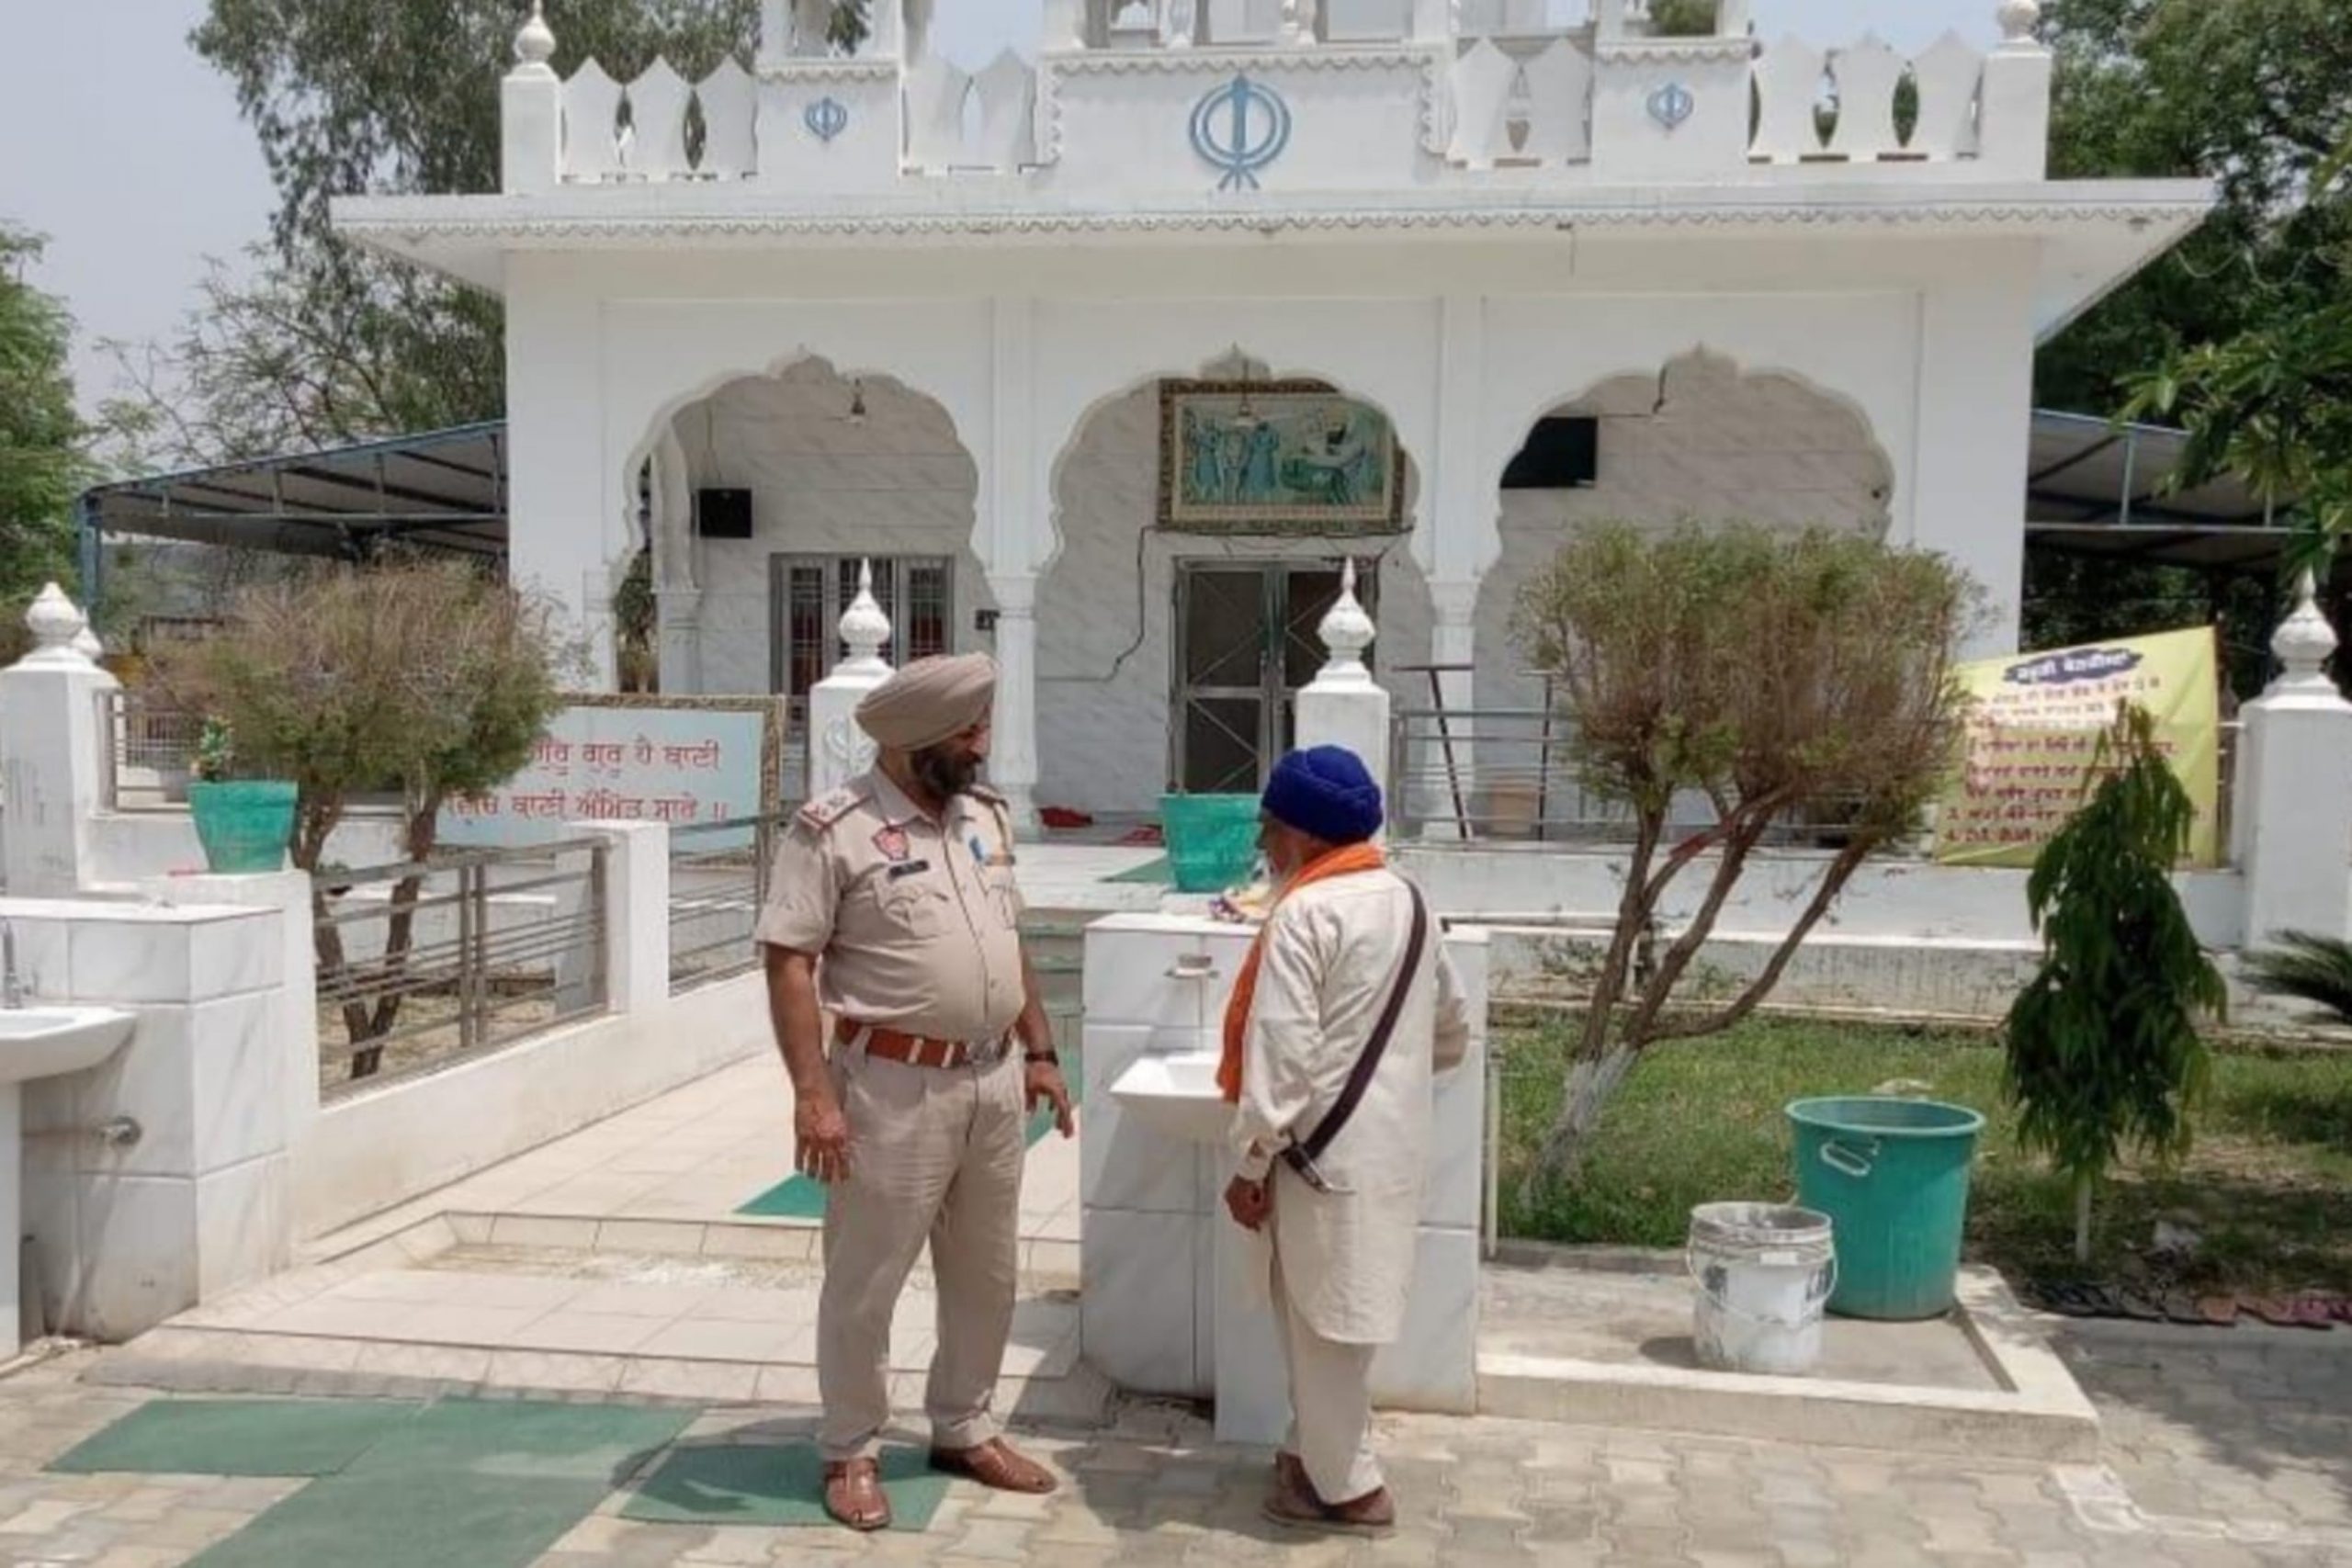 Security at religious places in Punjab to be strengthened